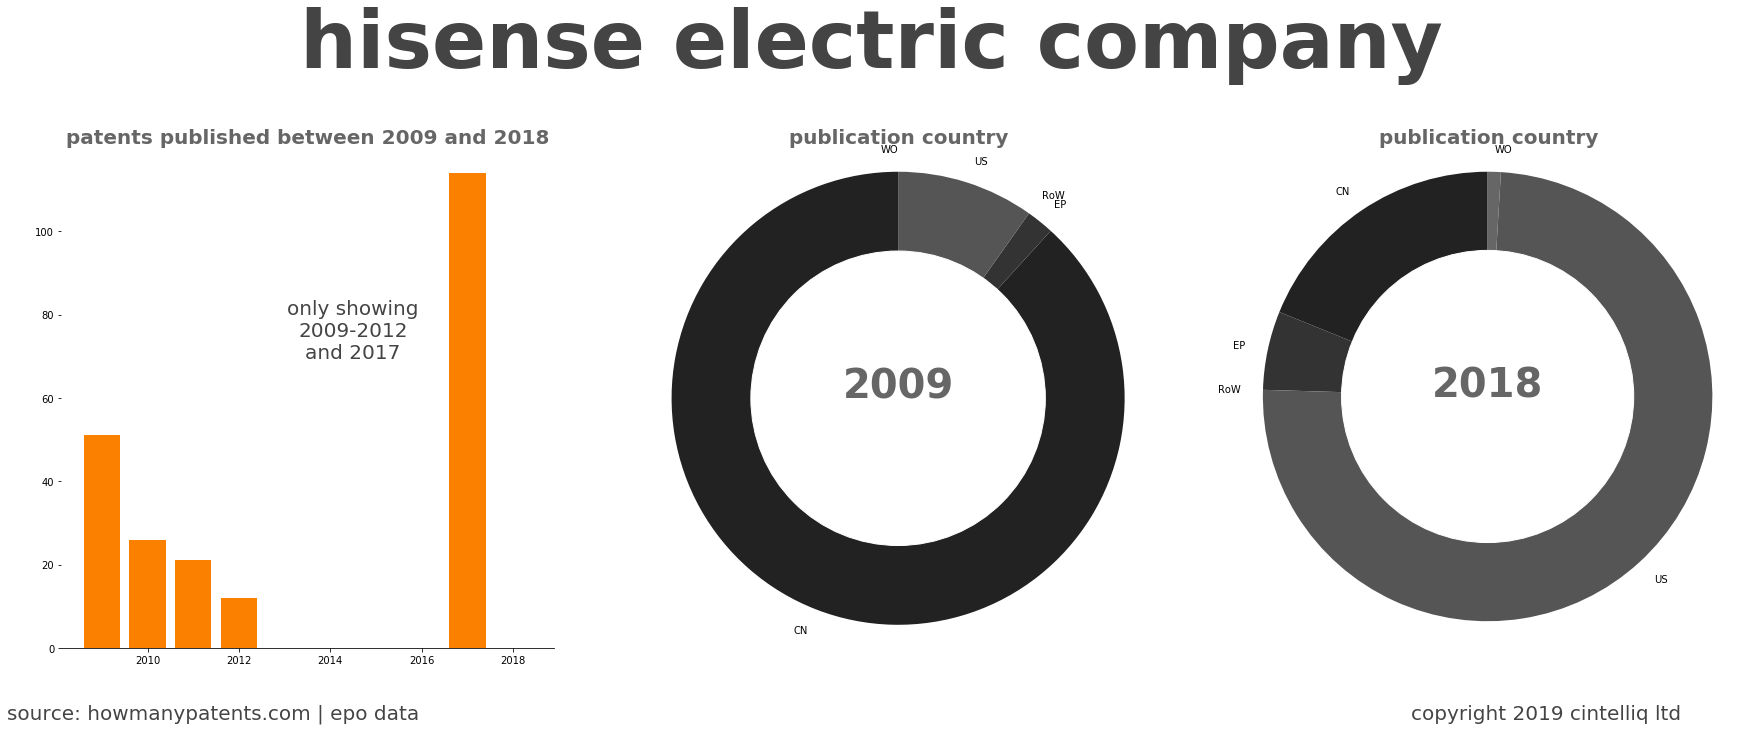 summary of patents for Hisense Electric Company